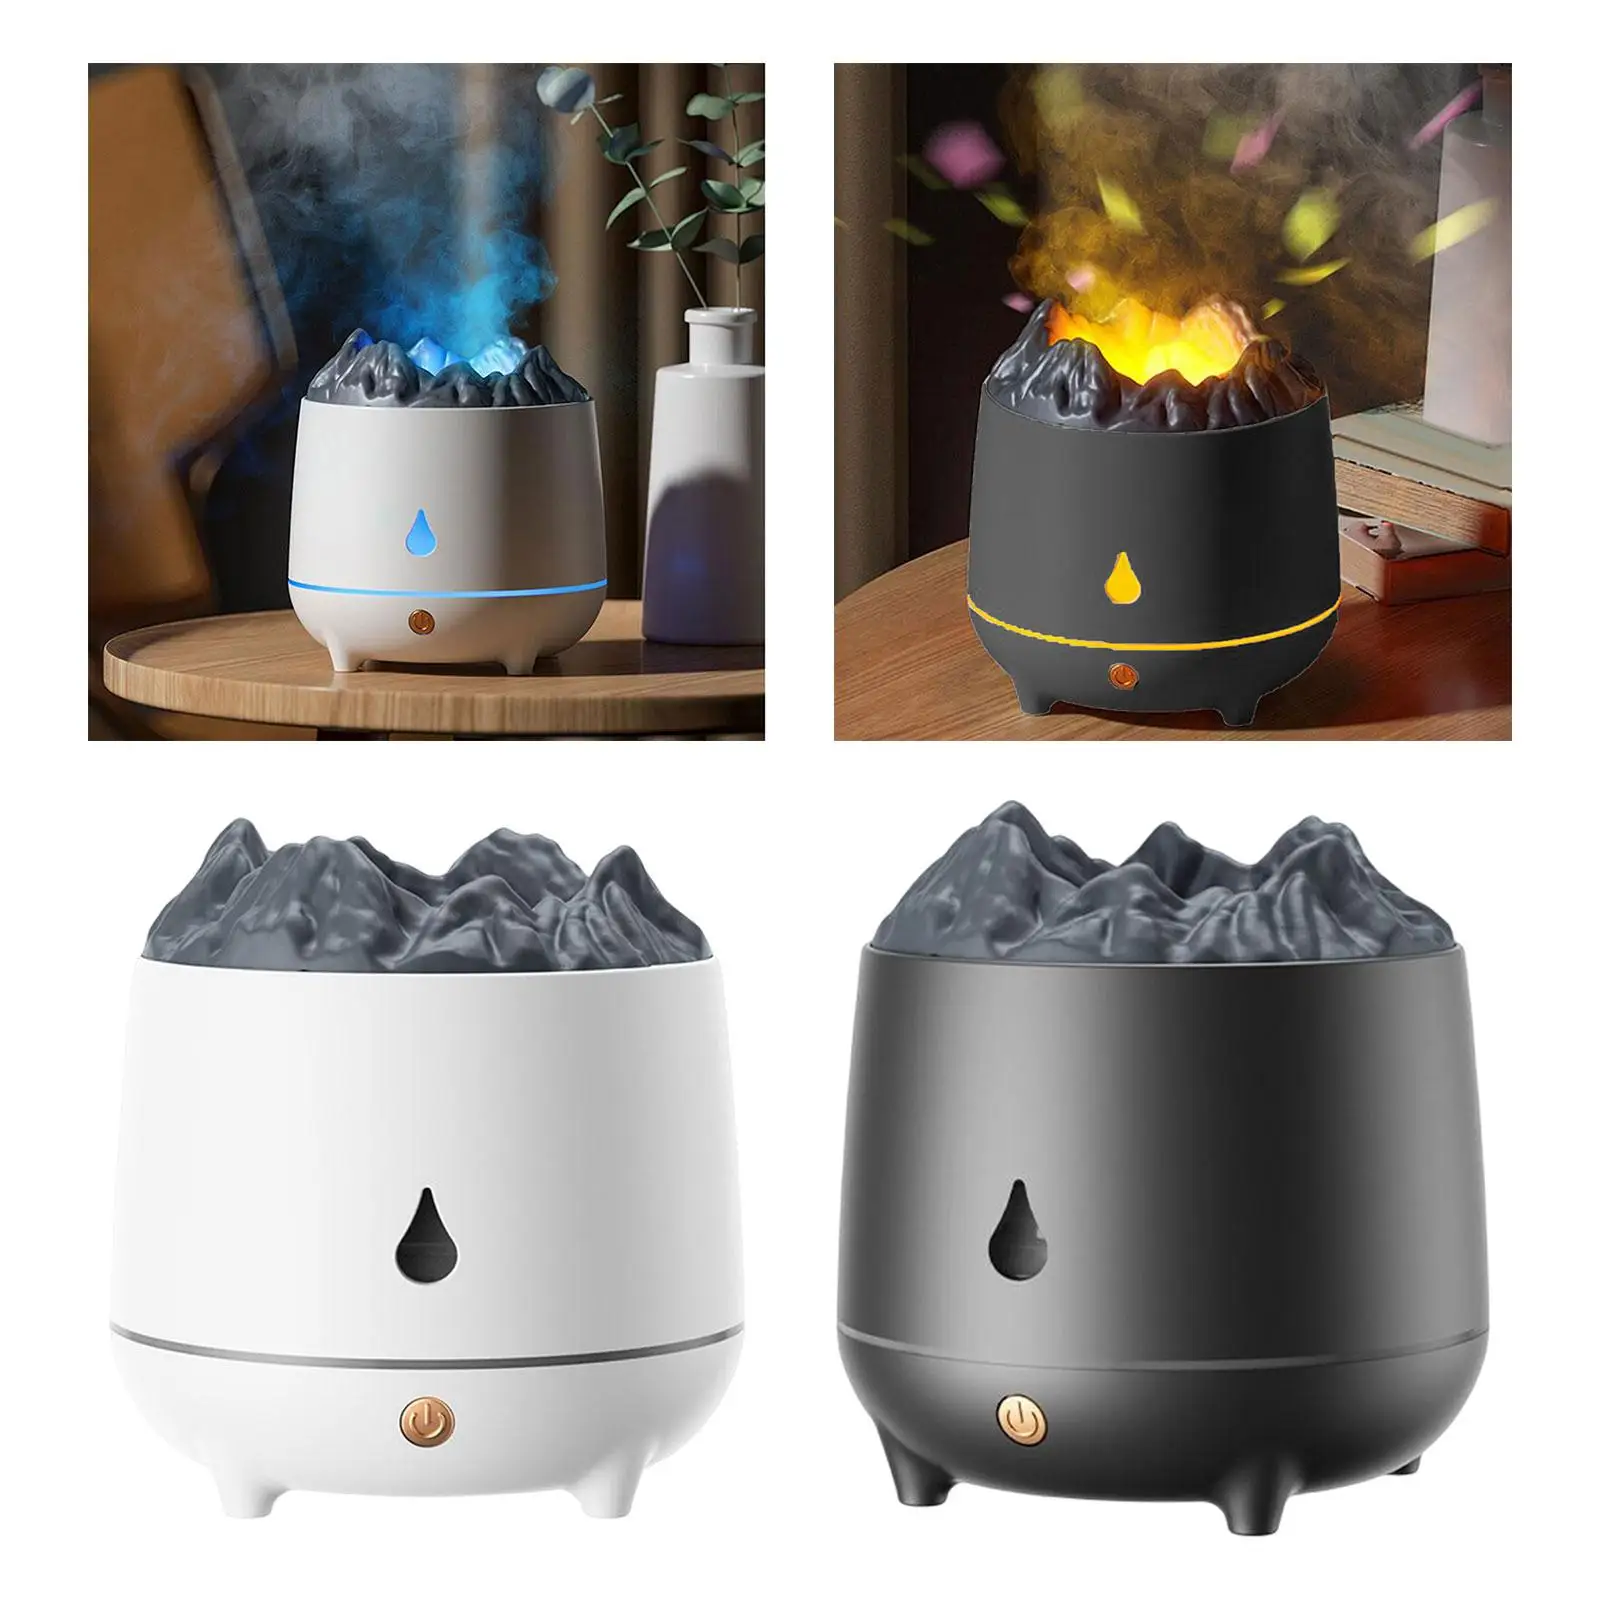 400ml Air Humidifier Essential Oil Diffuser Quiet LED Night Light Timer USB for Yoga Living Room Bedroom Desktop Home